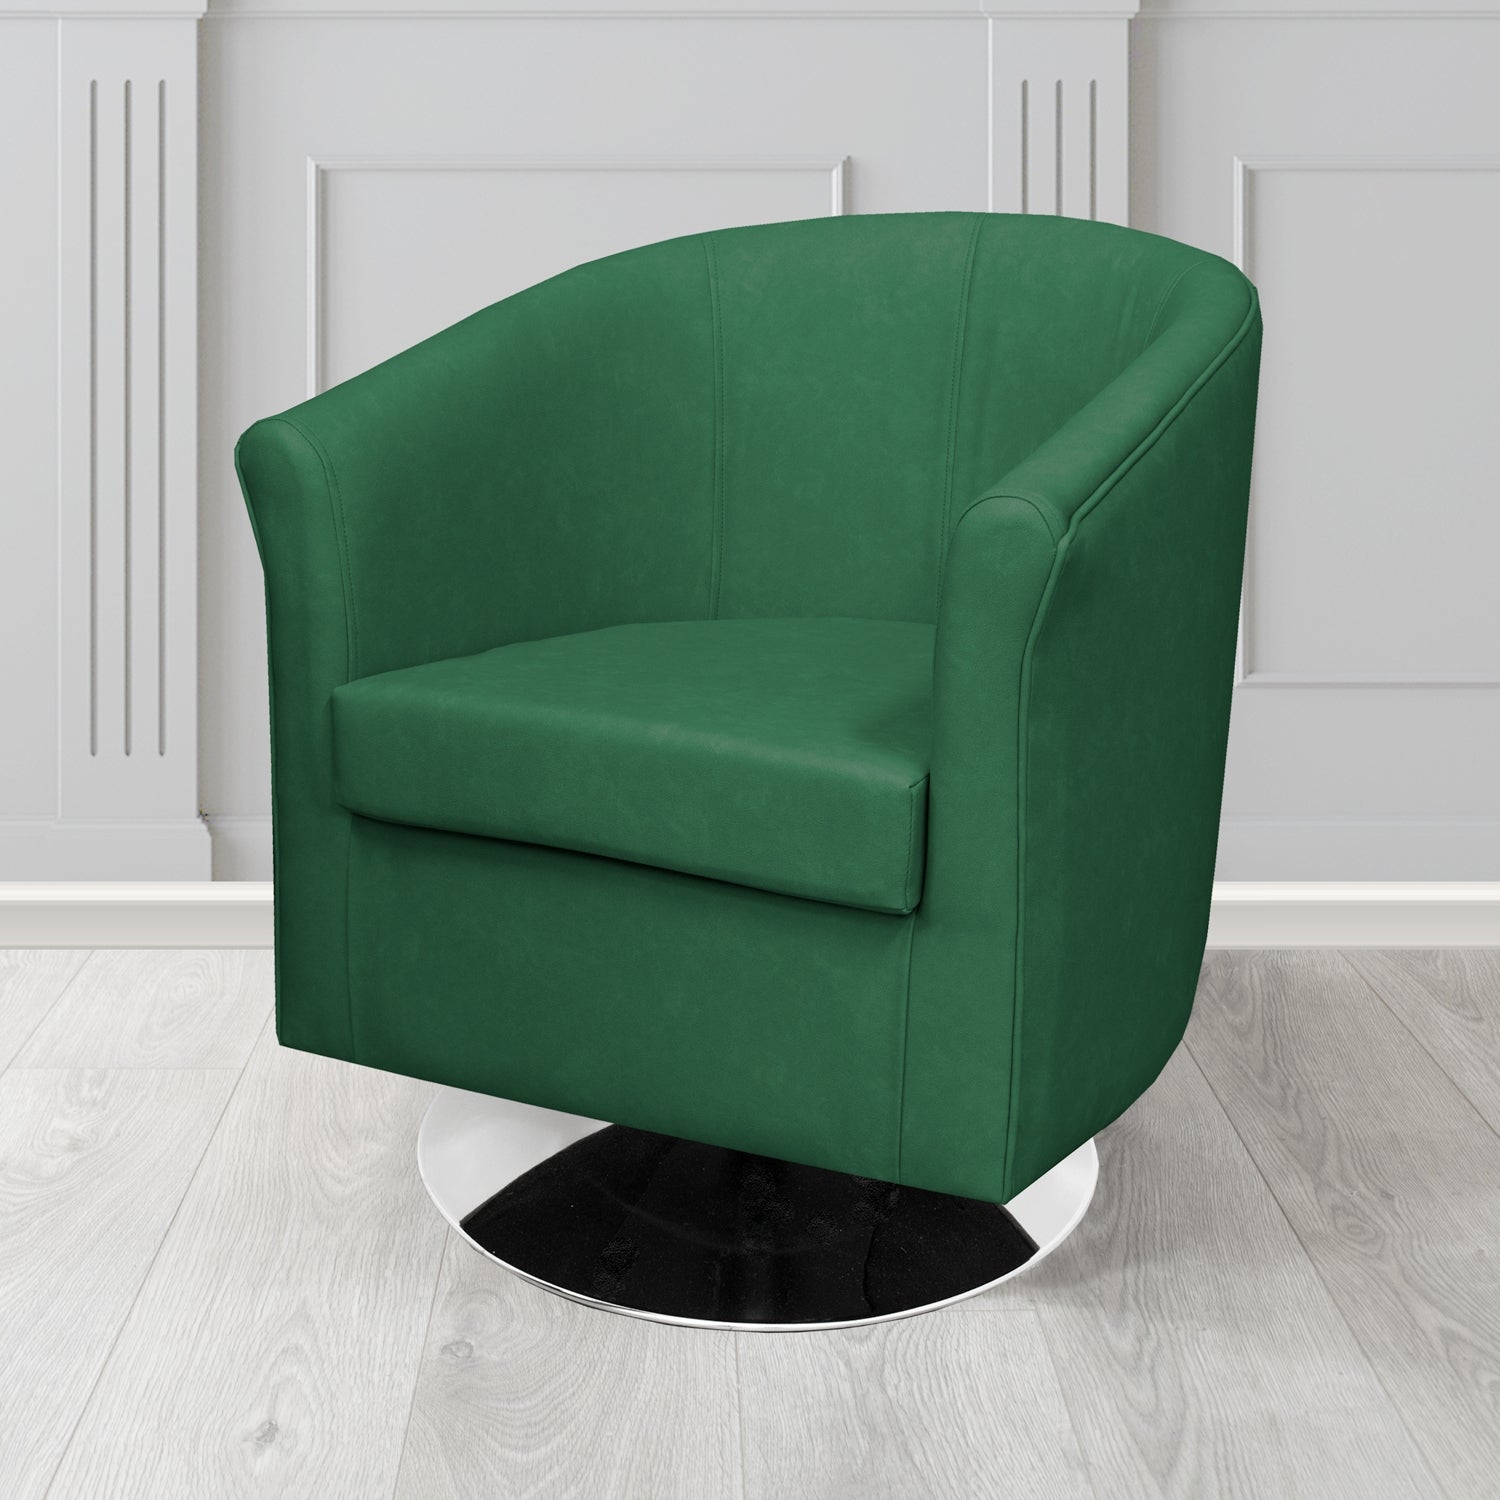 Tuscany Swivel Tub Chair in Infiniti Racing INF1853 Antimicrobial Crib 5 Faux Leather - The Tub Chair Shop